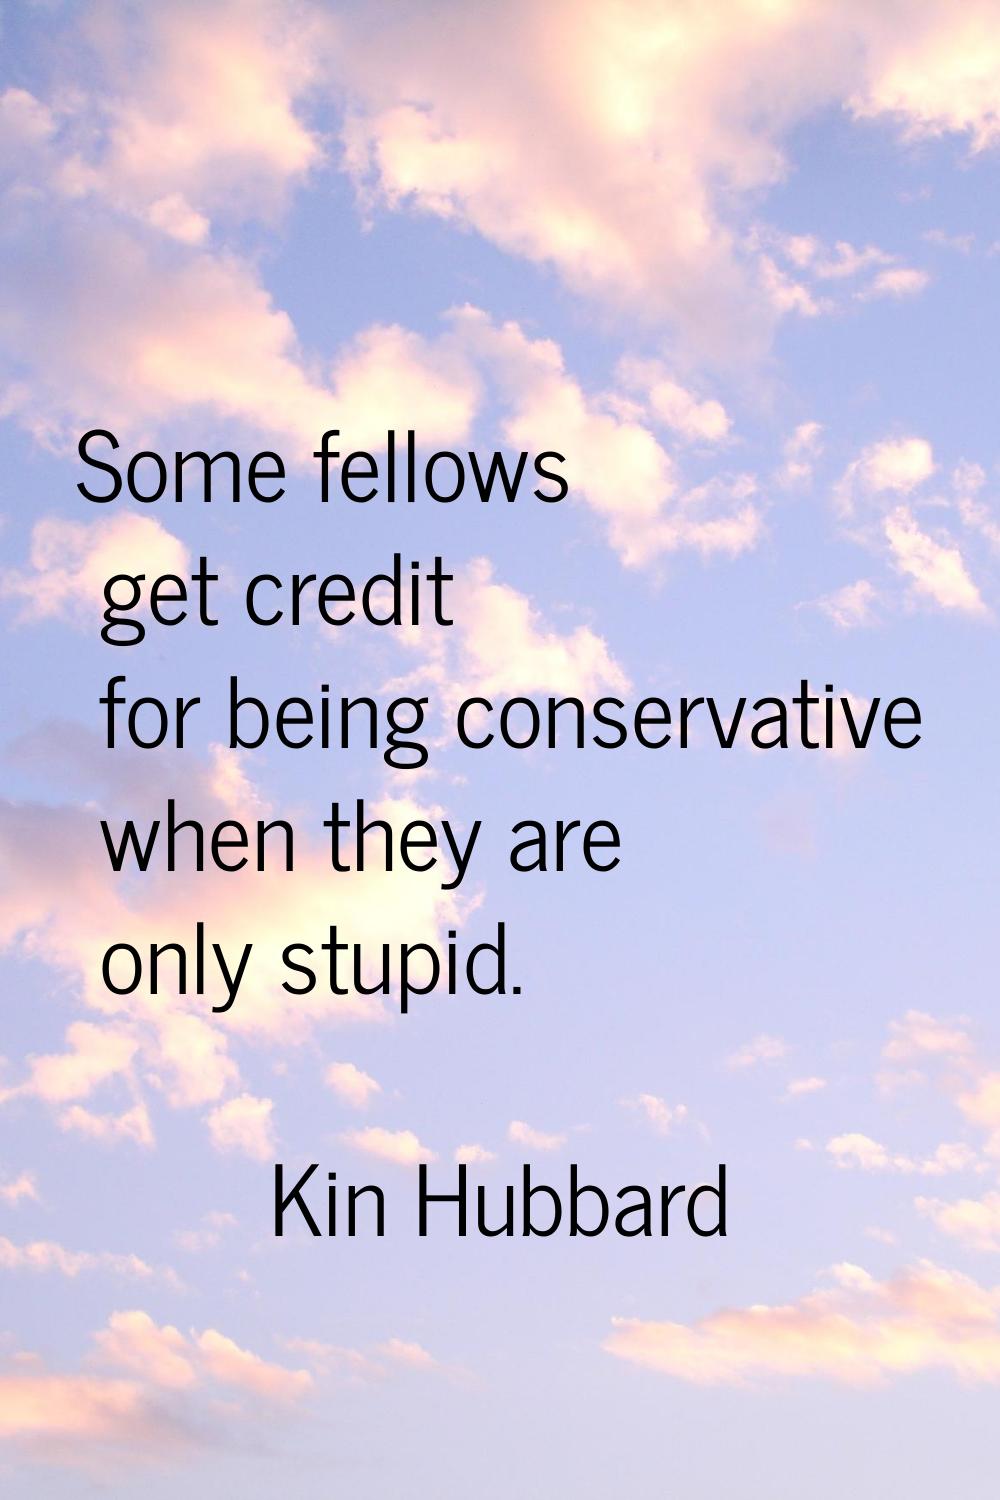 Some fellows get credit for being conservative when they are only stupid.